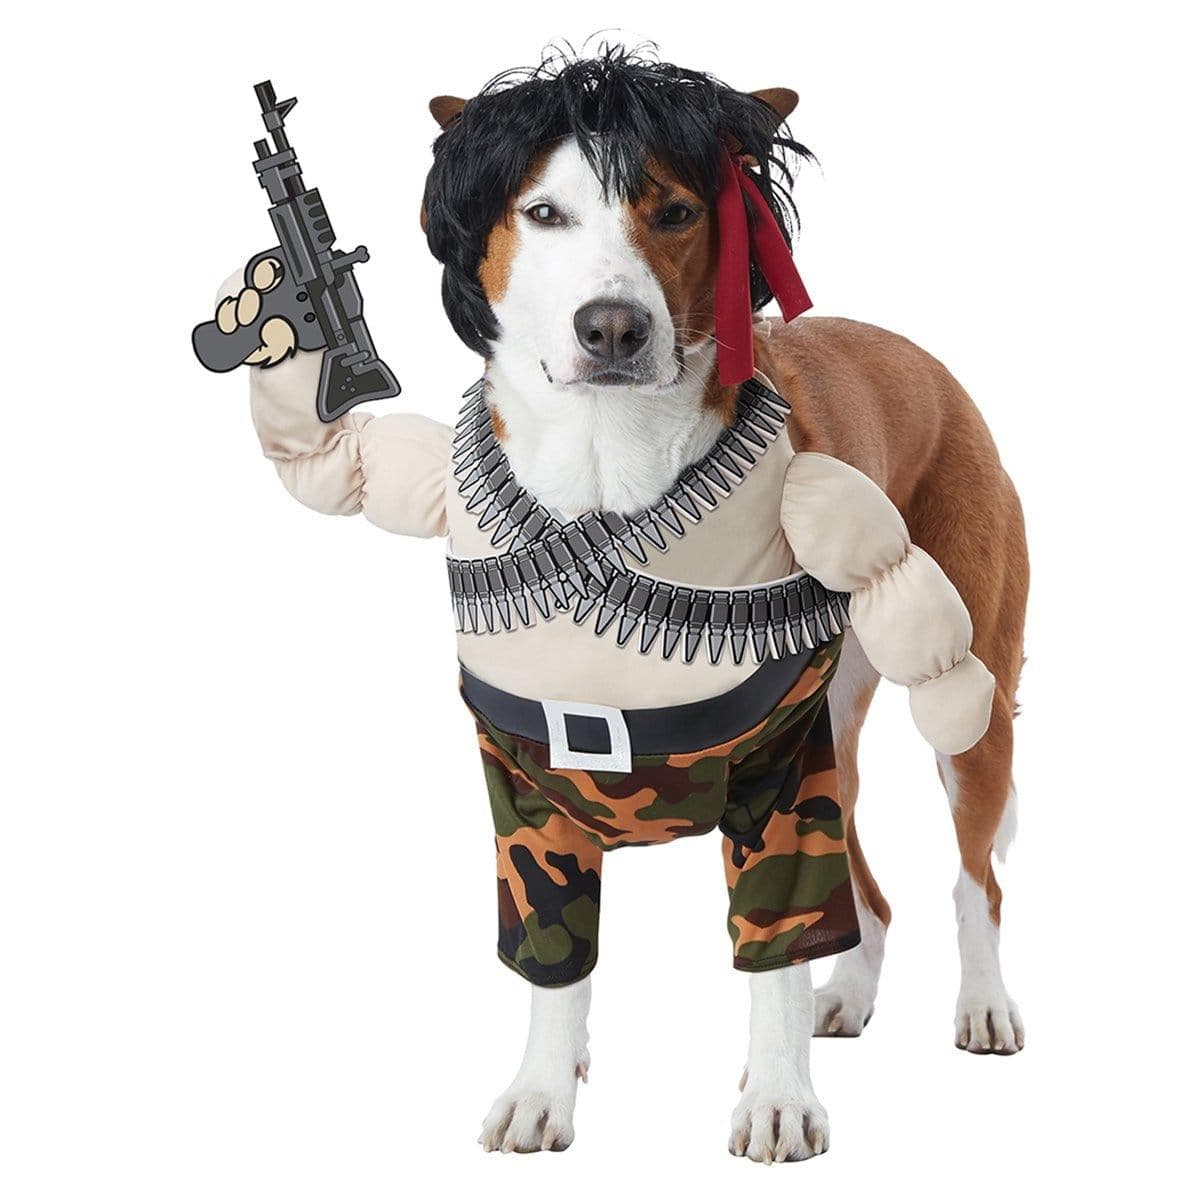 Buy Costumes Action Hero Costume for Dogs sold at Party Expert